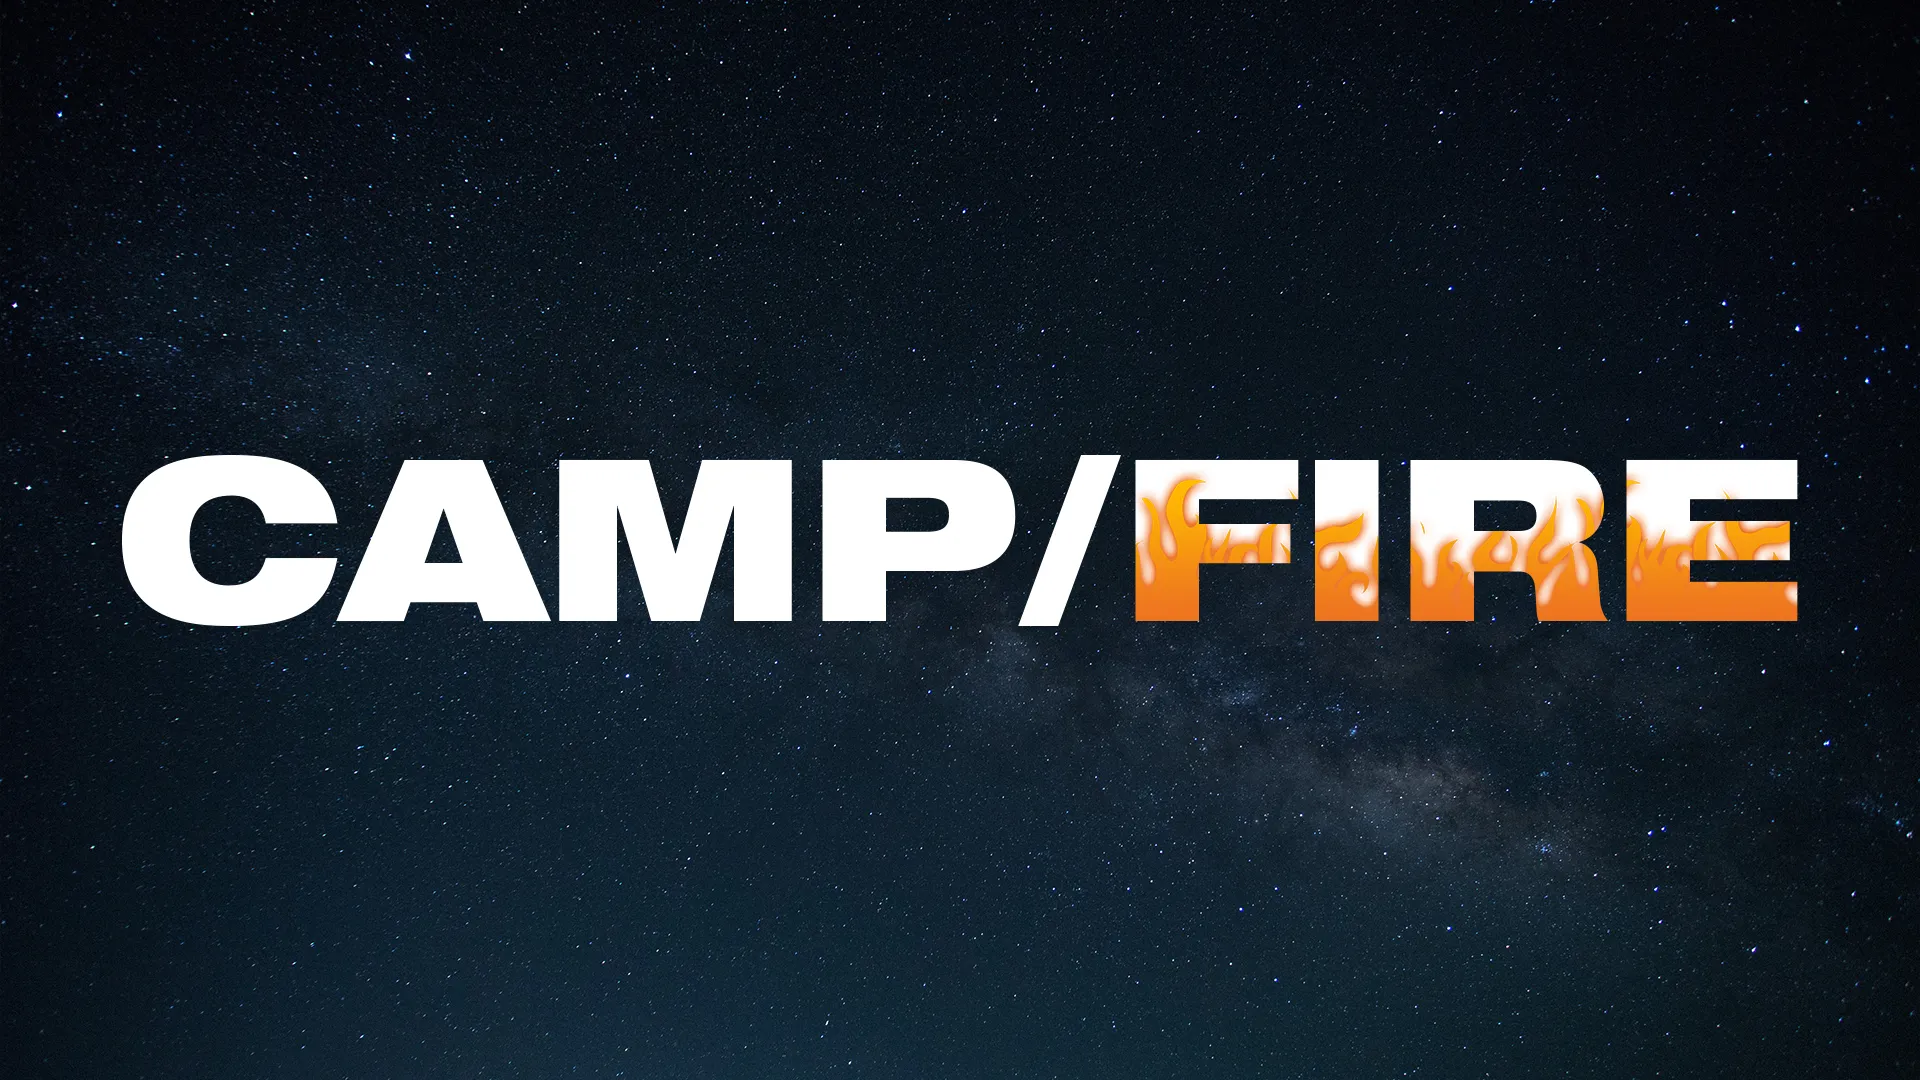 Get ready for an unforgettable outdoor adventure with this 'Camp/Fire' graphic, designed to spark excitement for church camping events under the stars. It's an excellent choice for church media promoting spiritual growth and community bonding in the great outdoors.